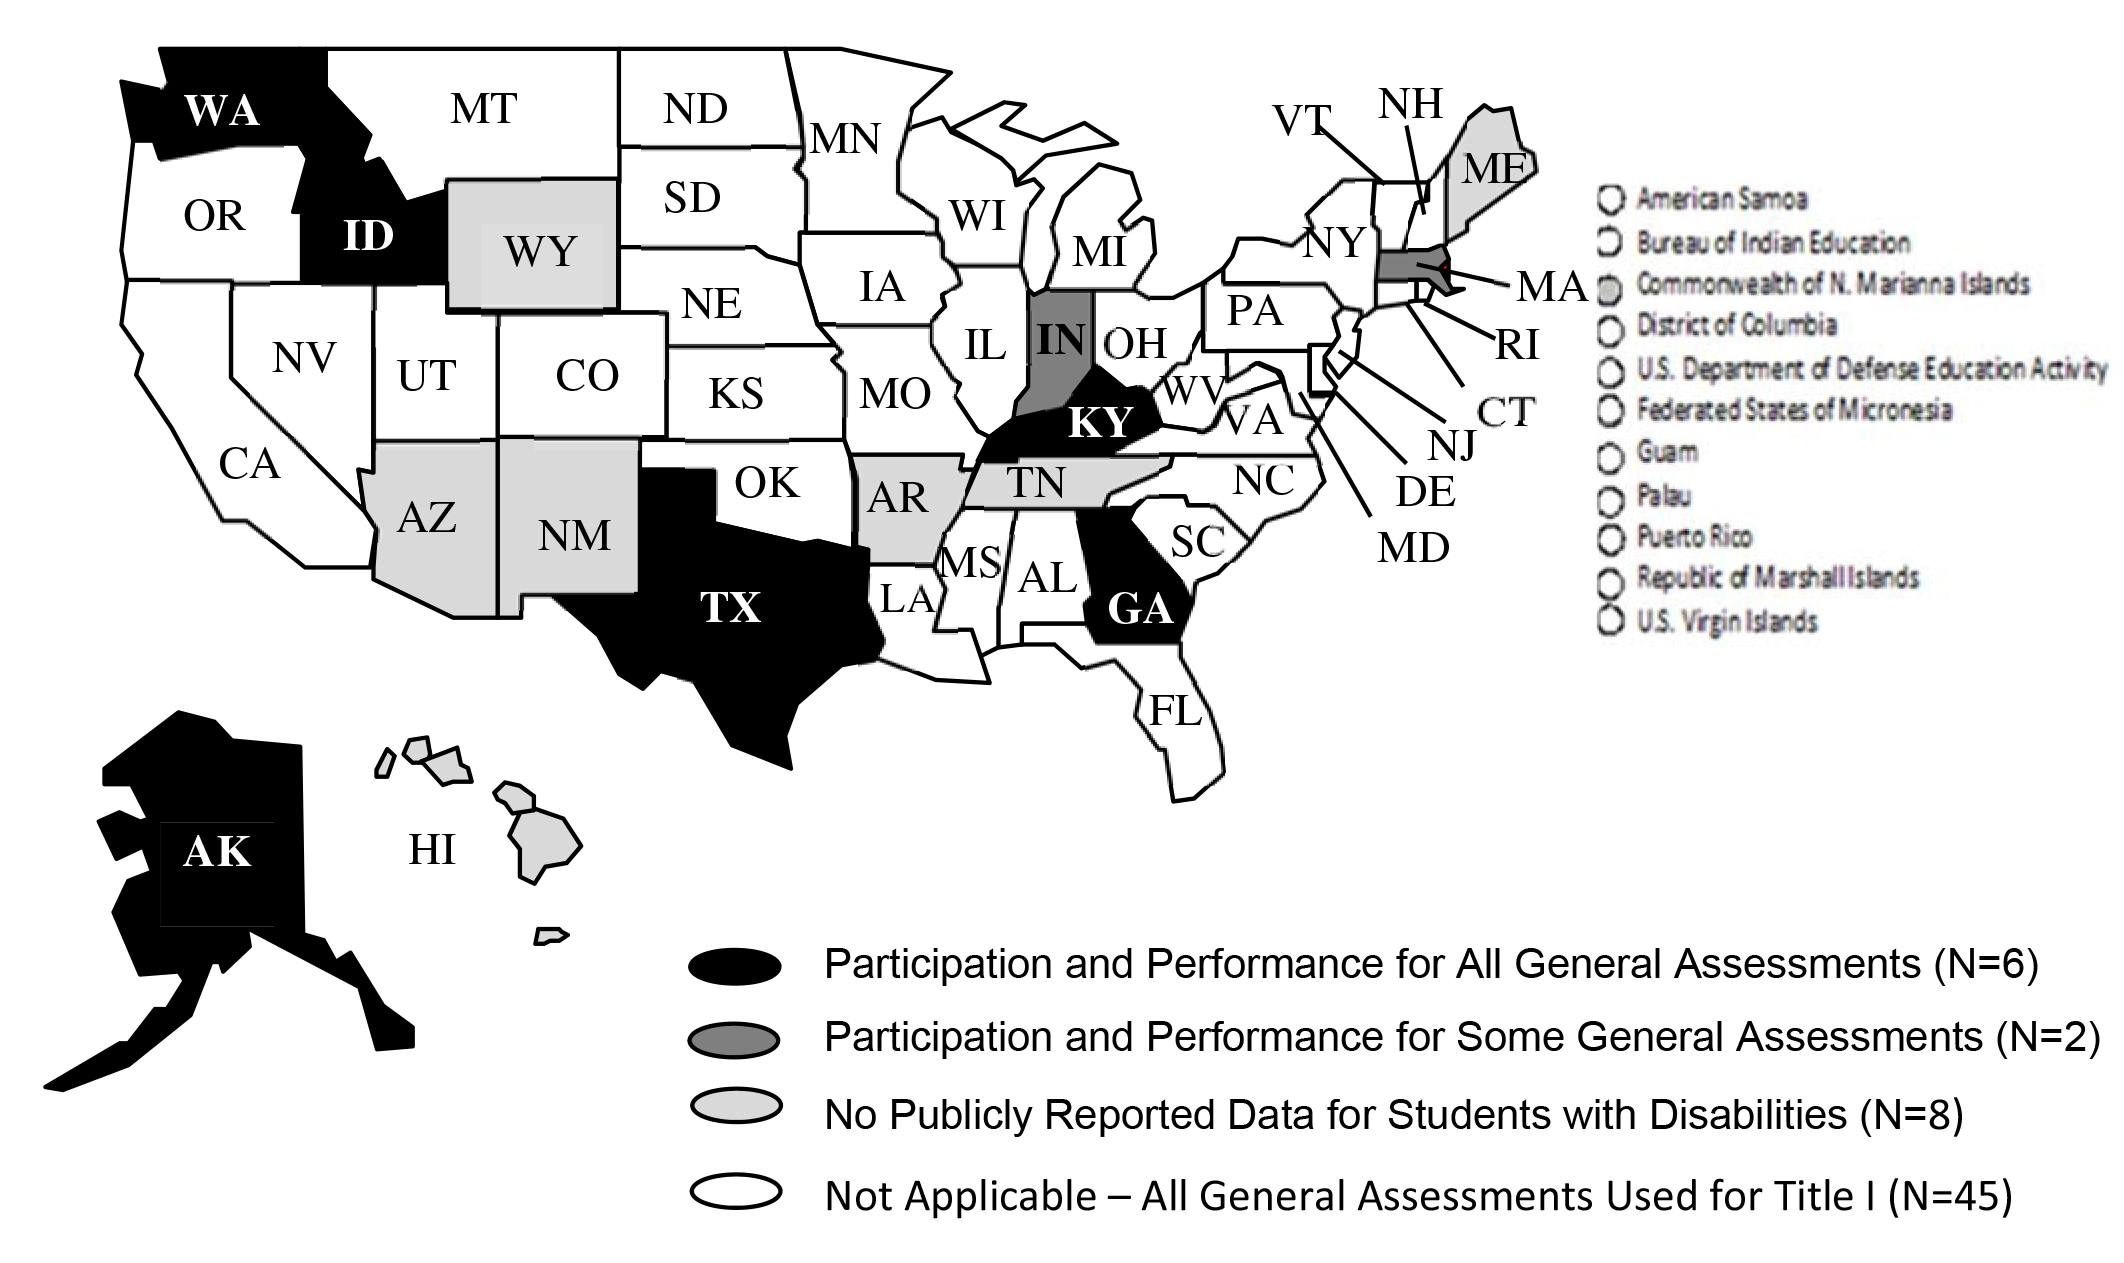 Figure 4 shows Figure 3. Extent of Reporting for Students with Disabilities in General Assessments Not Used for Title I [N=61]